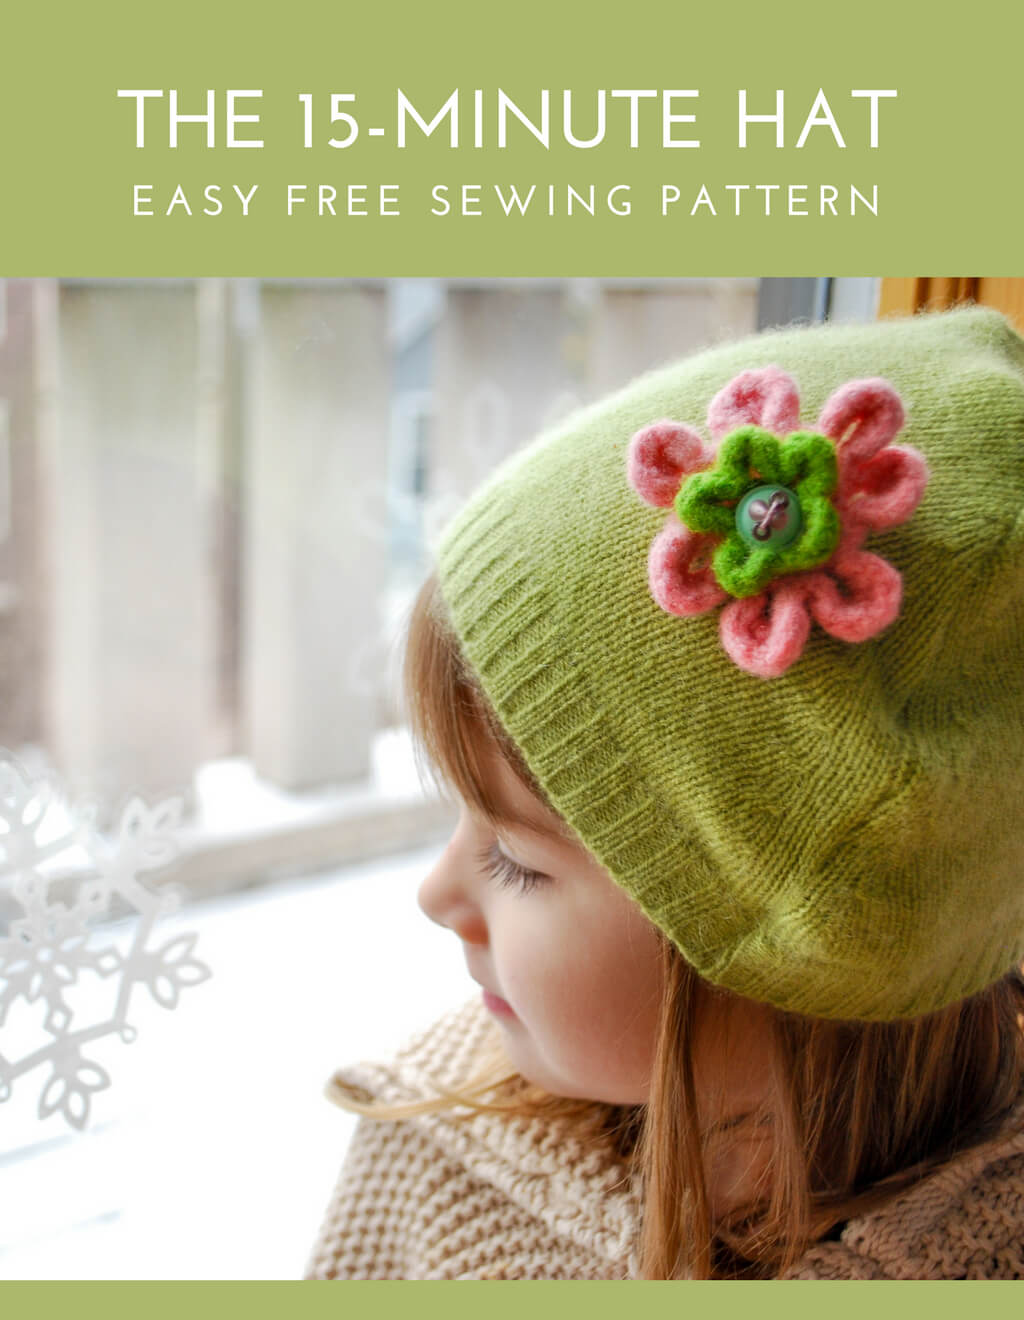 The 15-minute DIY winter hat. This is such a simple beginner sewing project! Grab an old sweater and see how to make a recycled sweater hat for yourself or as a DIY gift. #recycled #sewing #freesewingpatterns #freepatterns #recycled #upcycle #sew